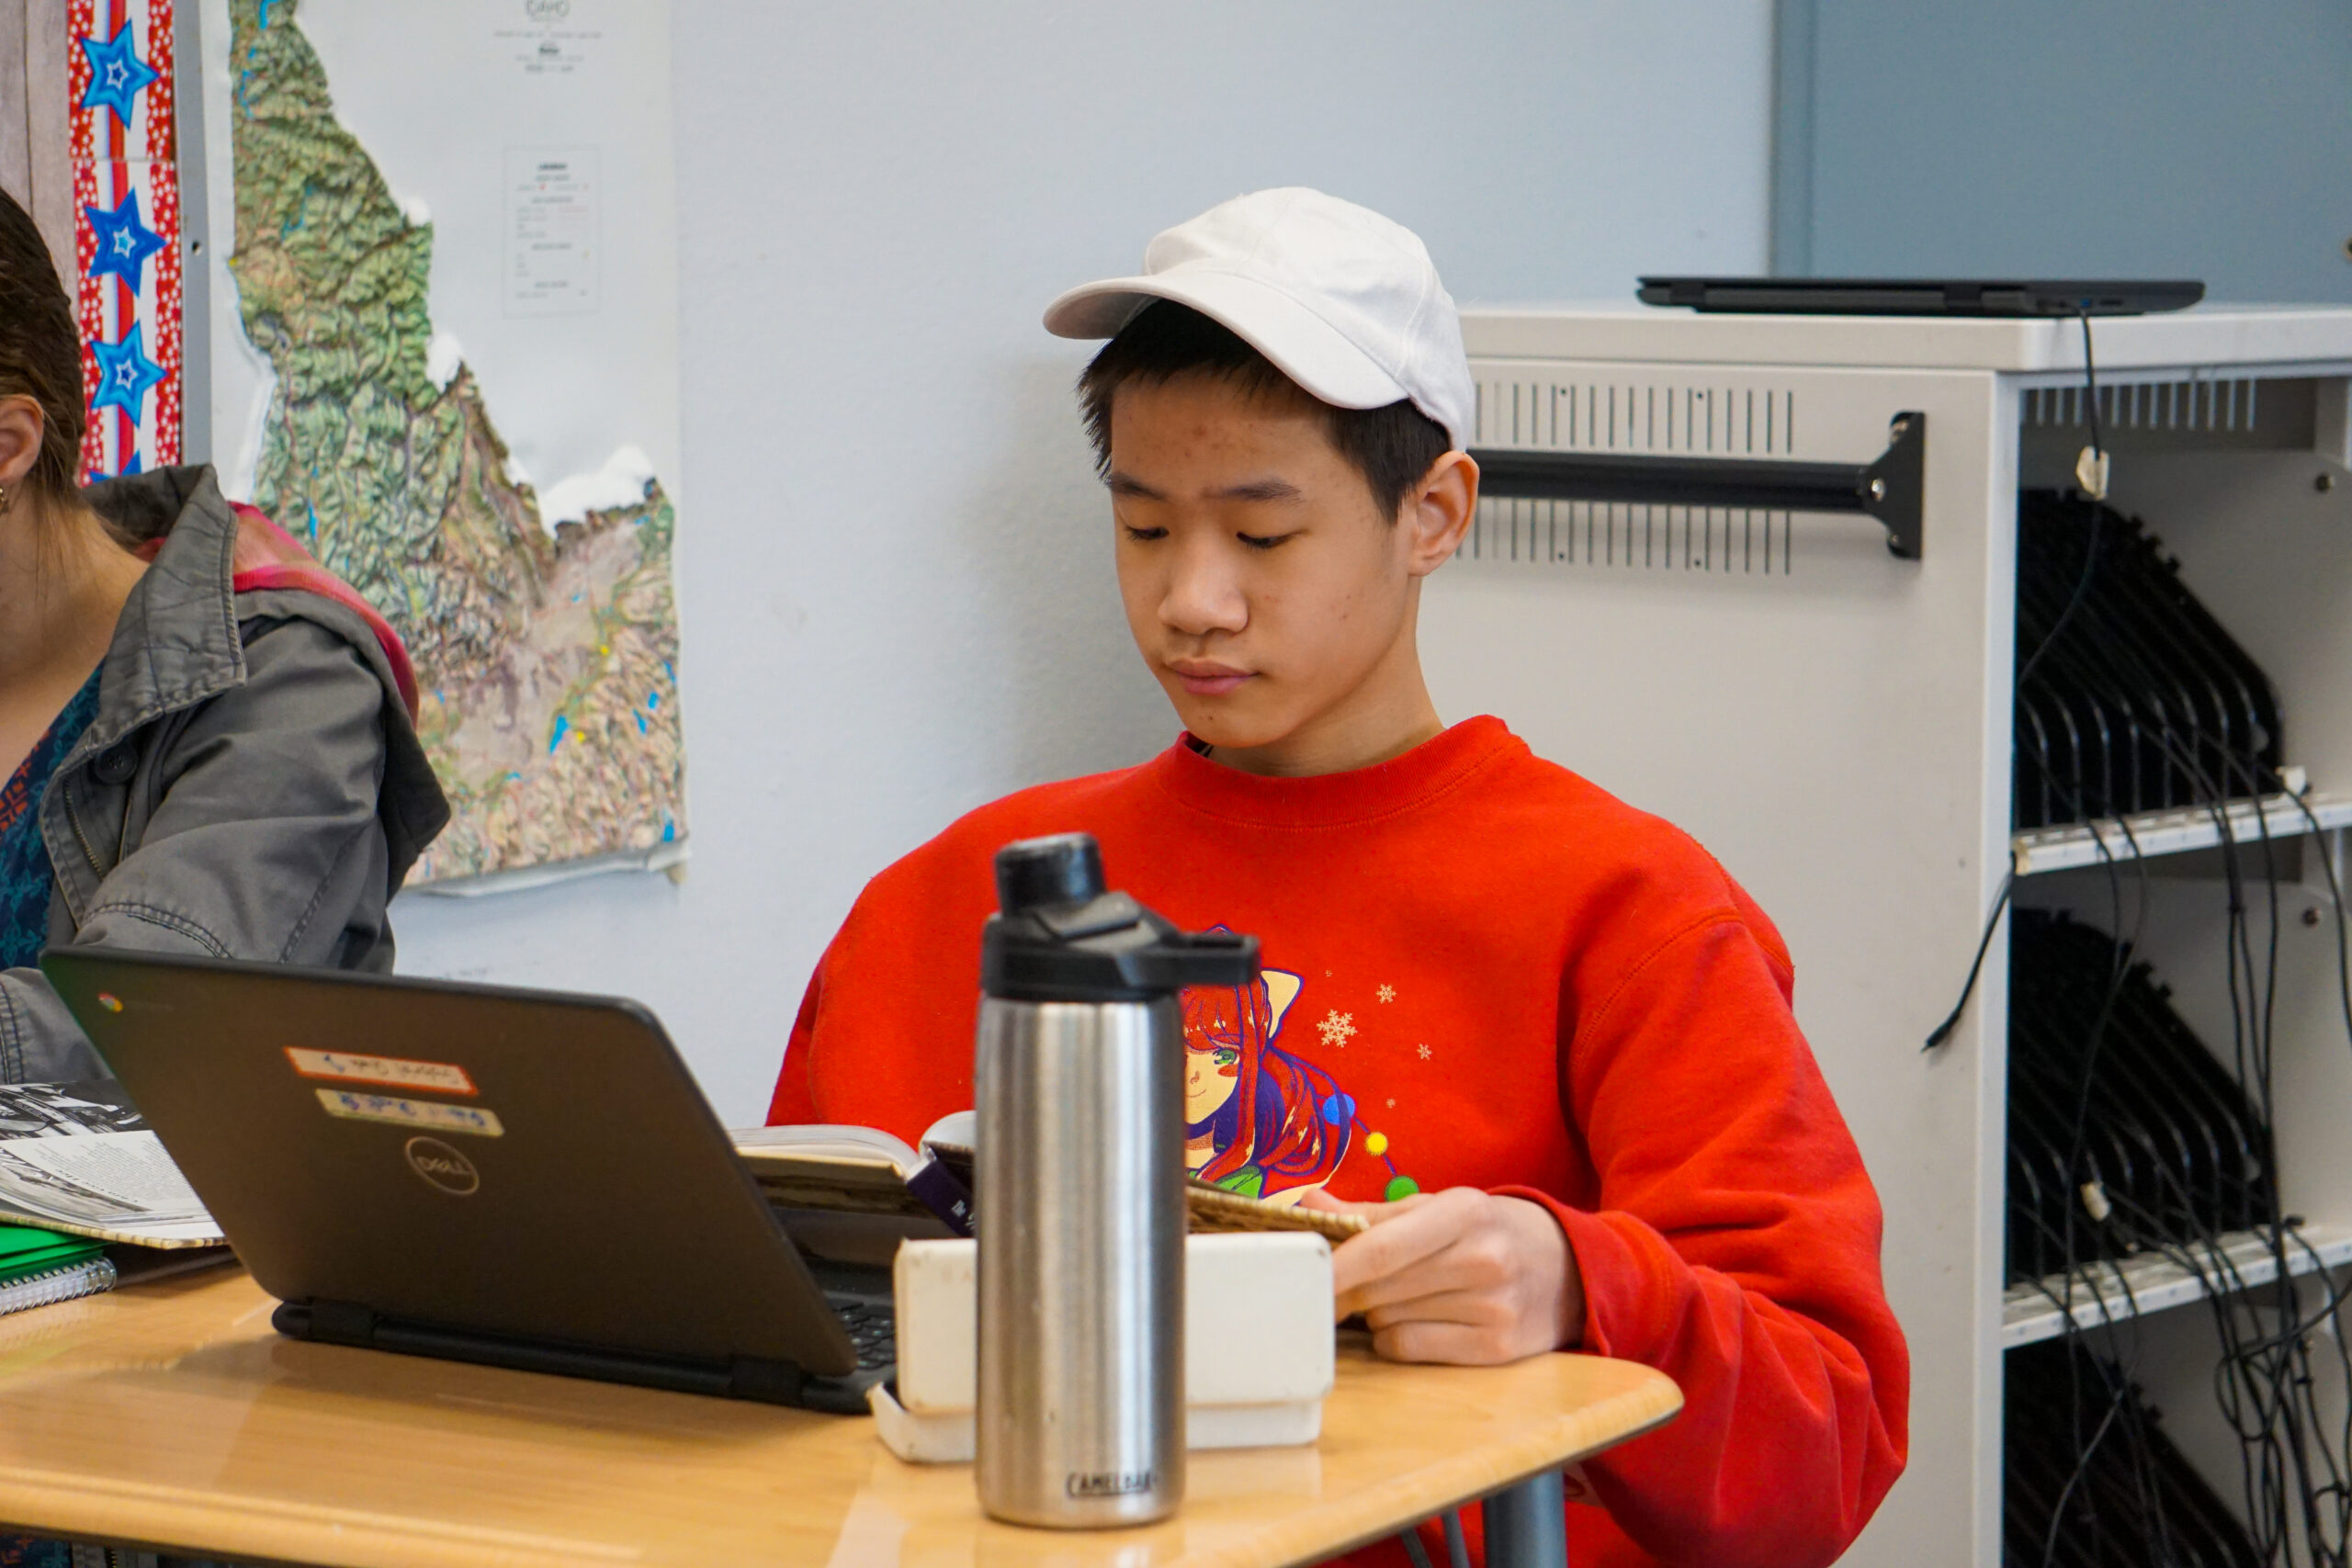 Student in red sweatshirt and white baseball cap using laptop while at a desk